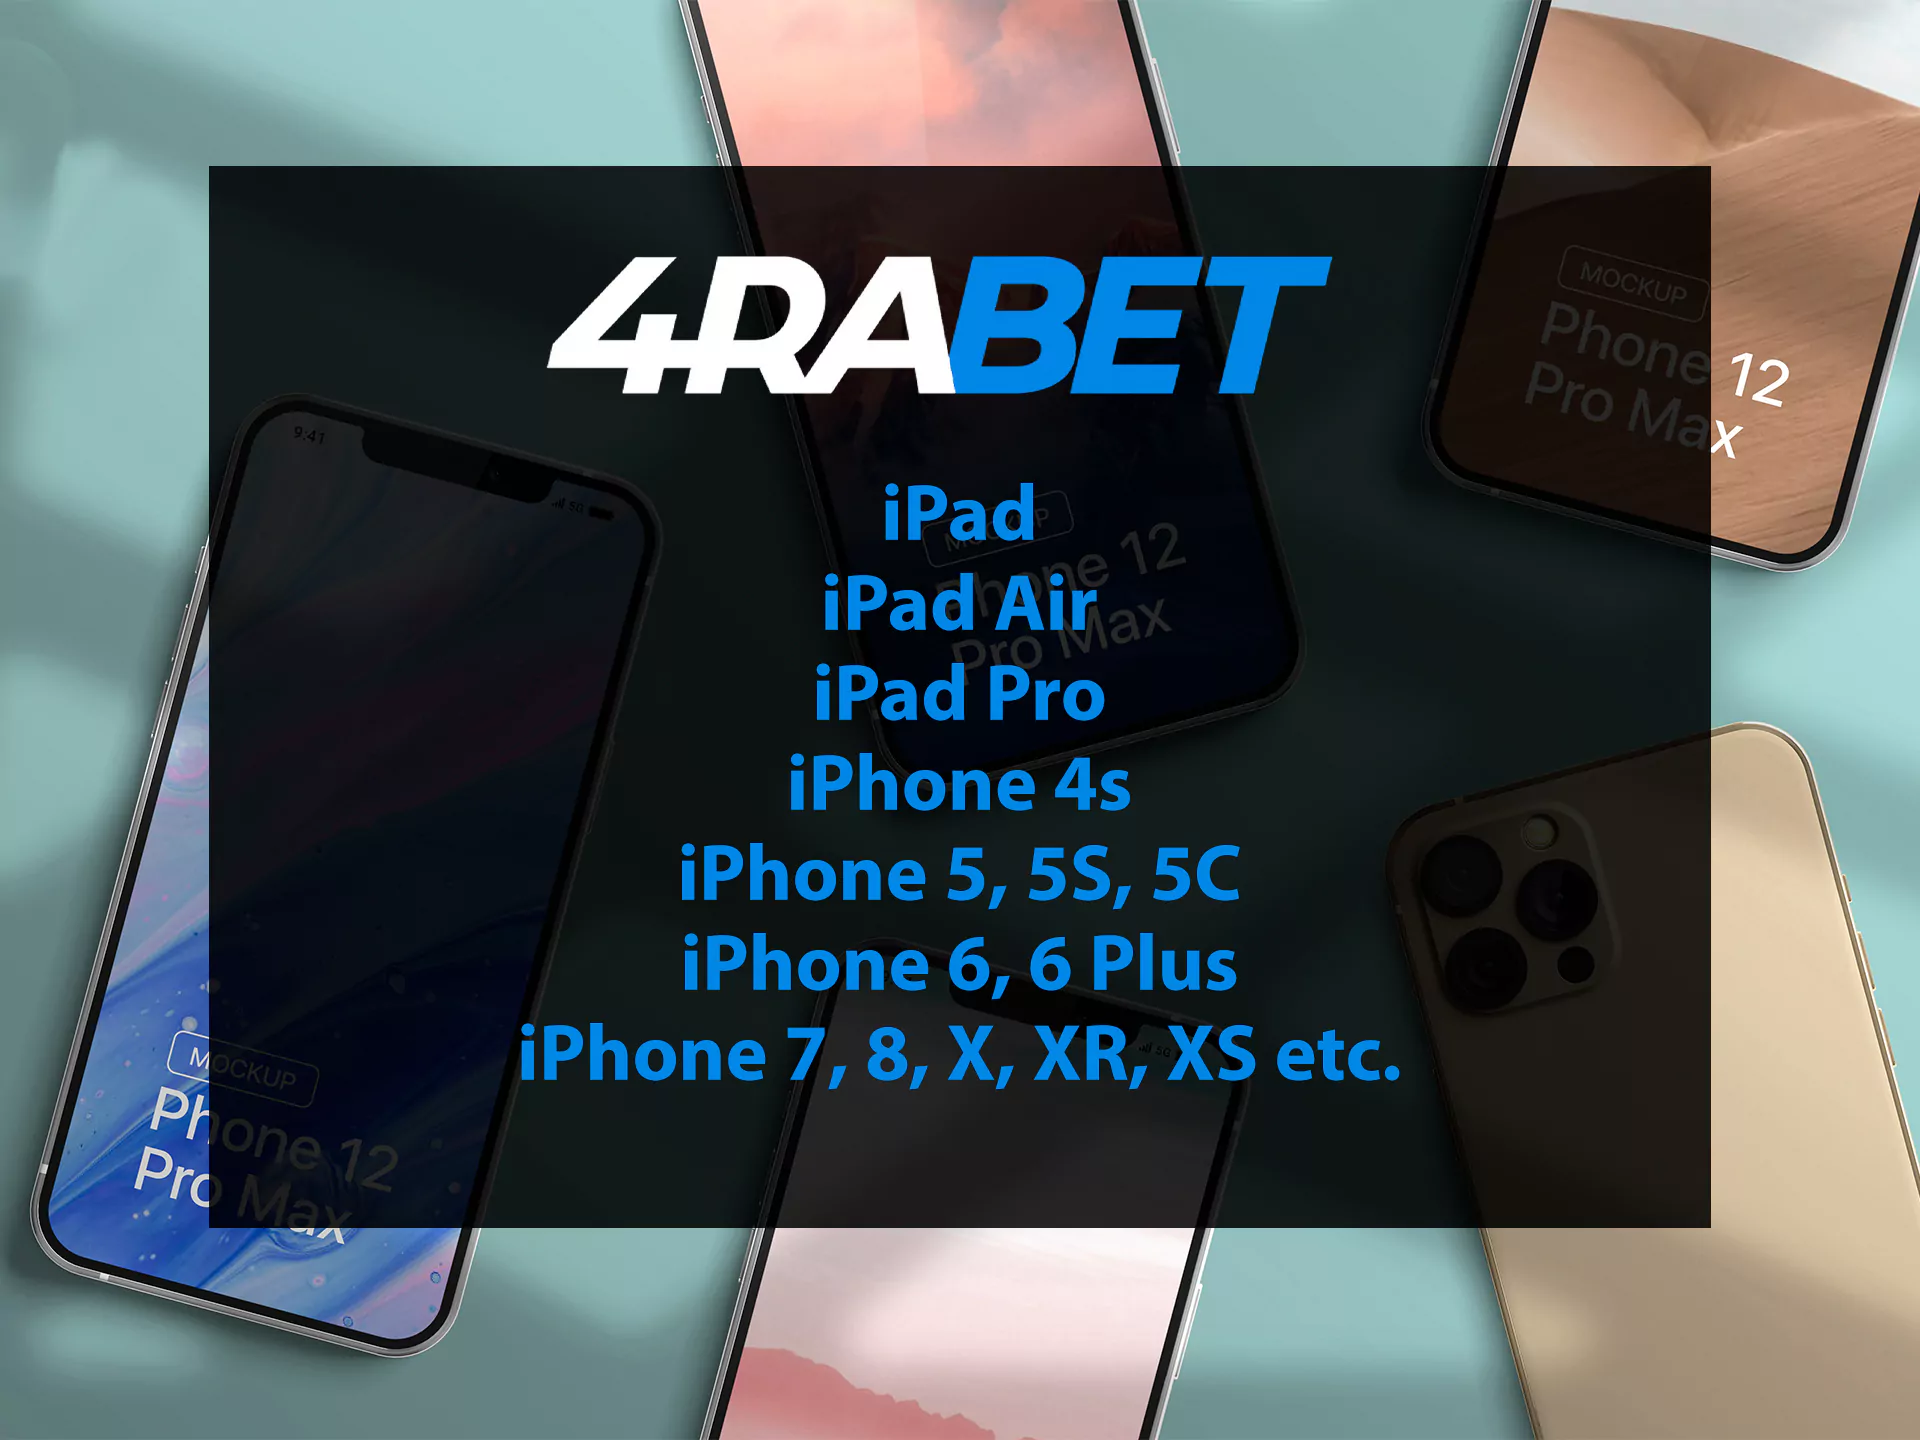 Almost each modern iPhone or iPad can launch the 4rabet app easily.